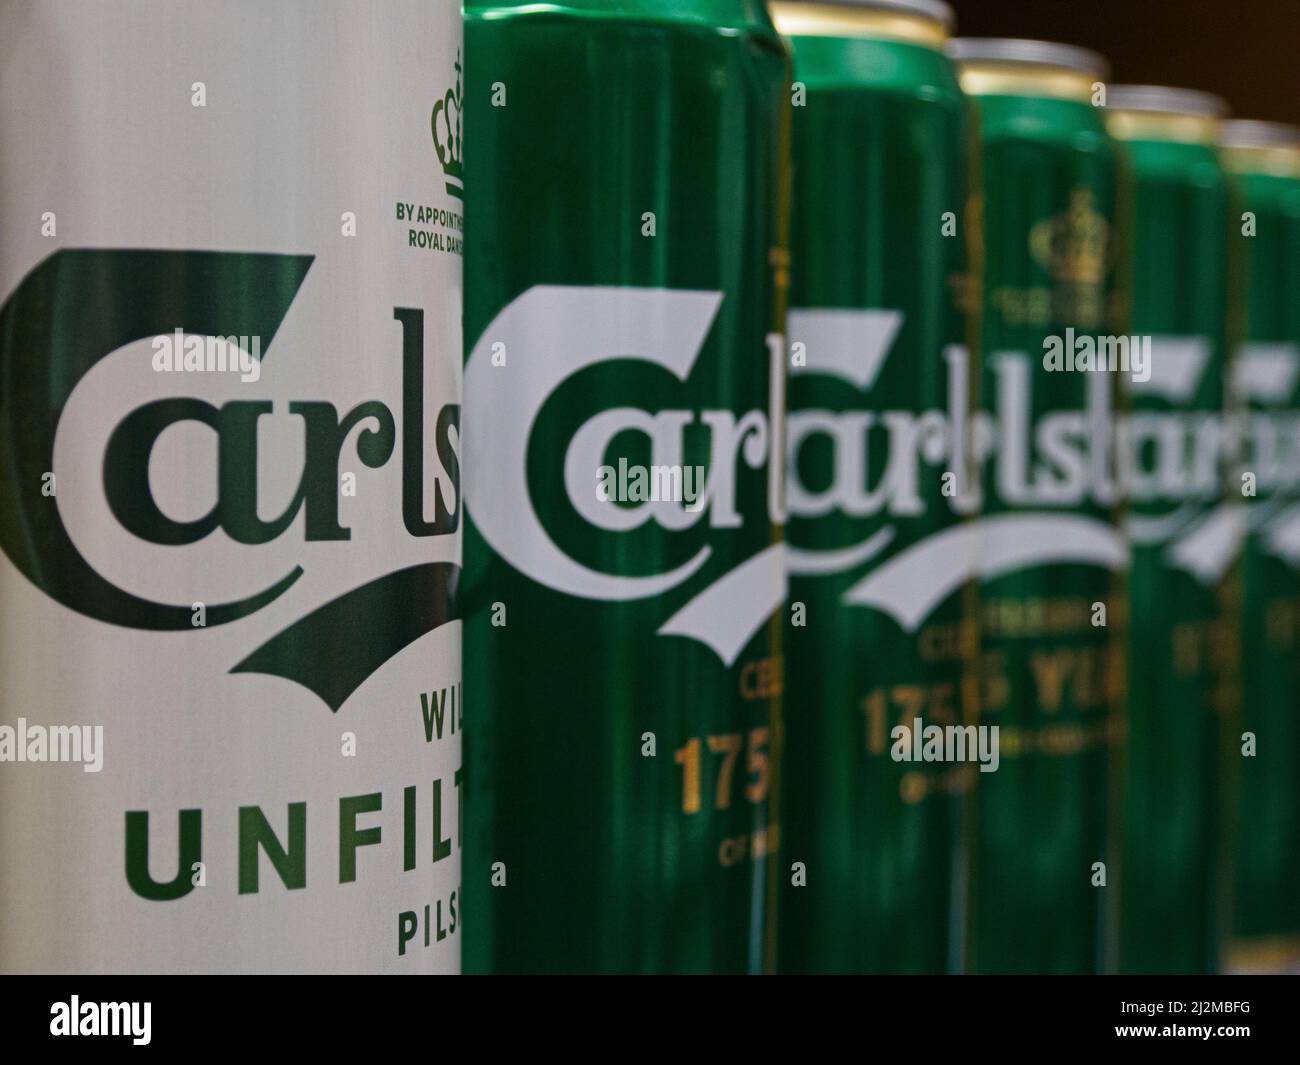 Overhale Luske opladning Moscow, Russia. 31st Mar, 2022. Carlsberg beer cans seen on a supermarket  shelf. It was reported that Carlsberg Group is leaving the Russian market  and plans to transfer the local business to